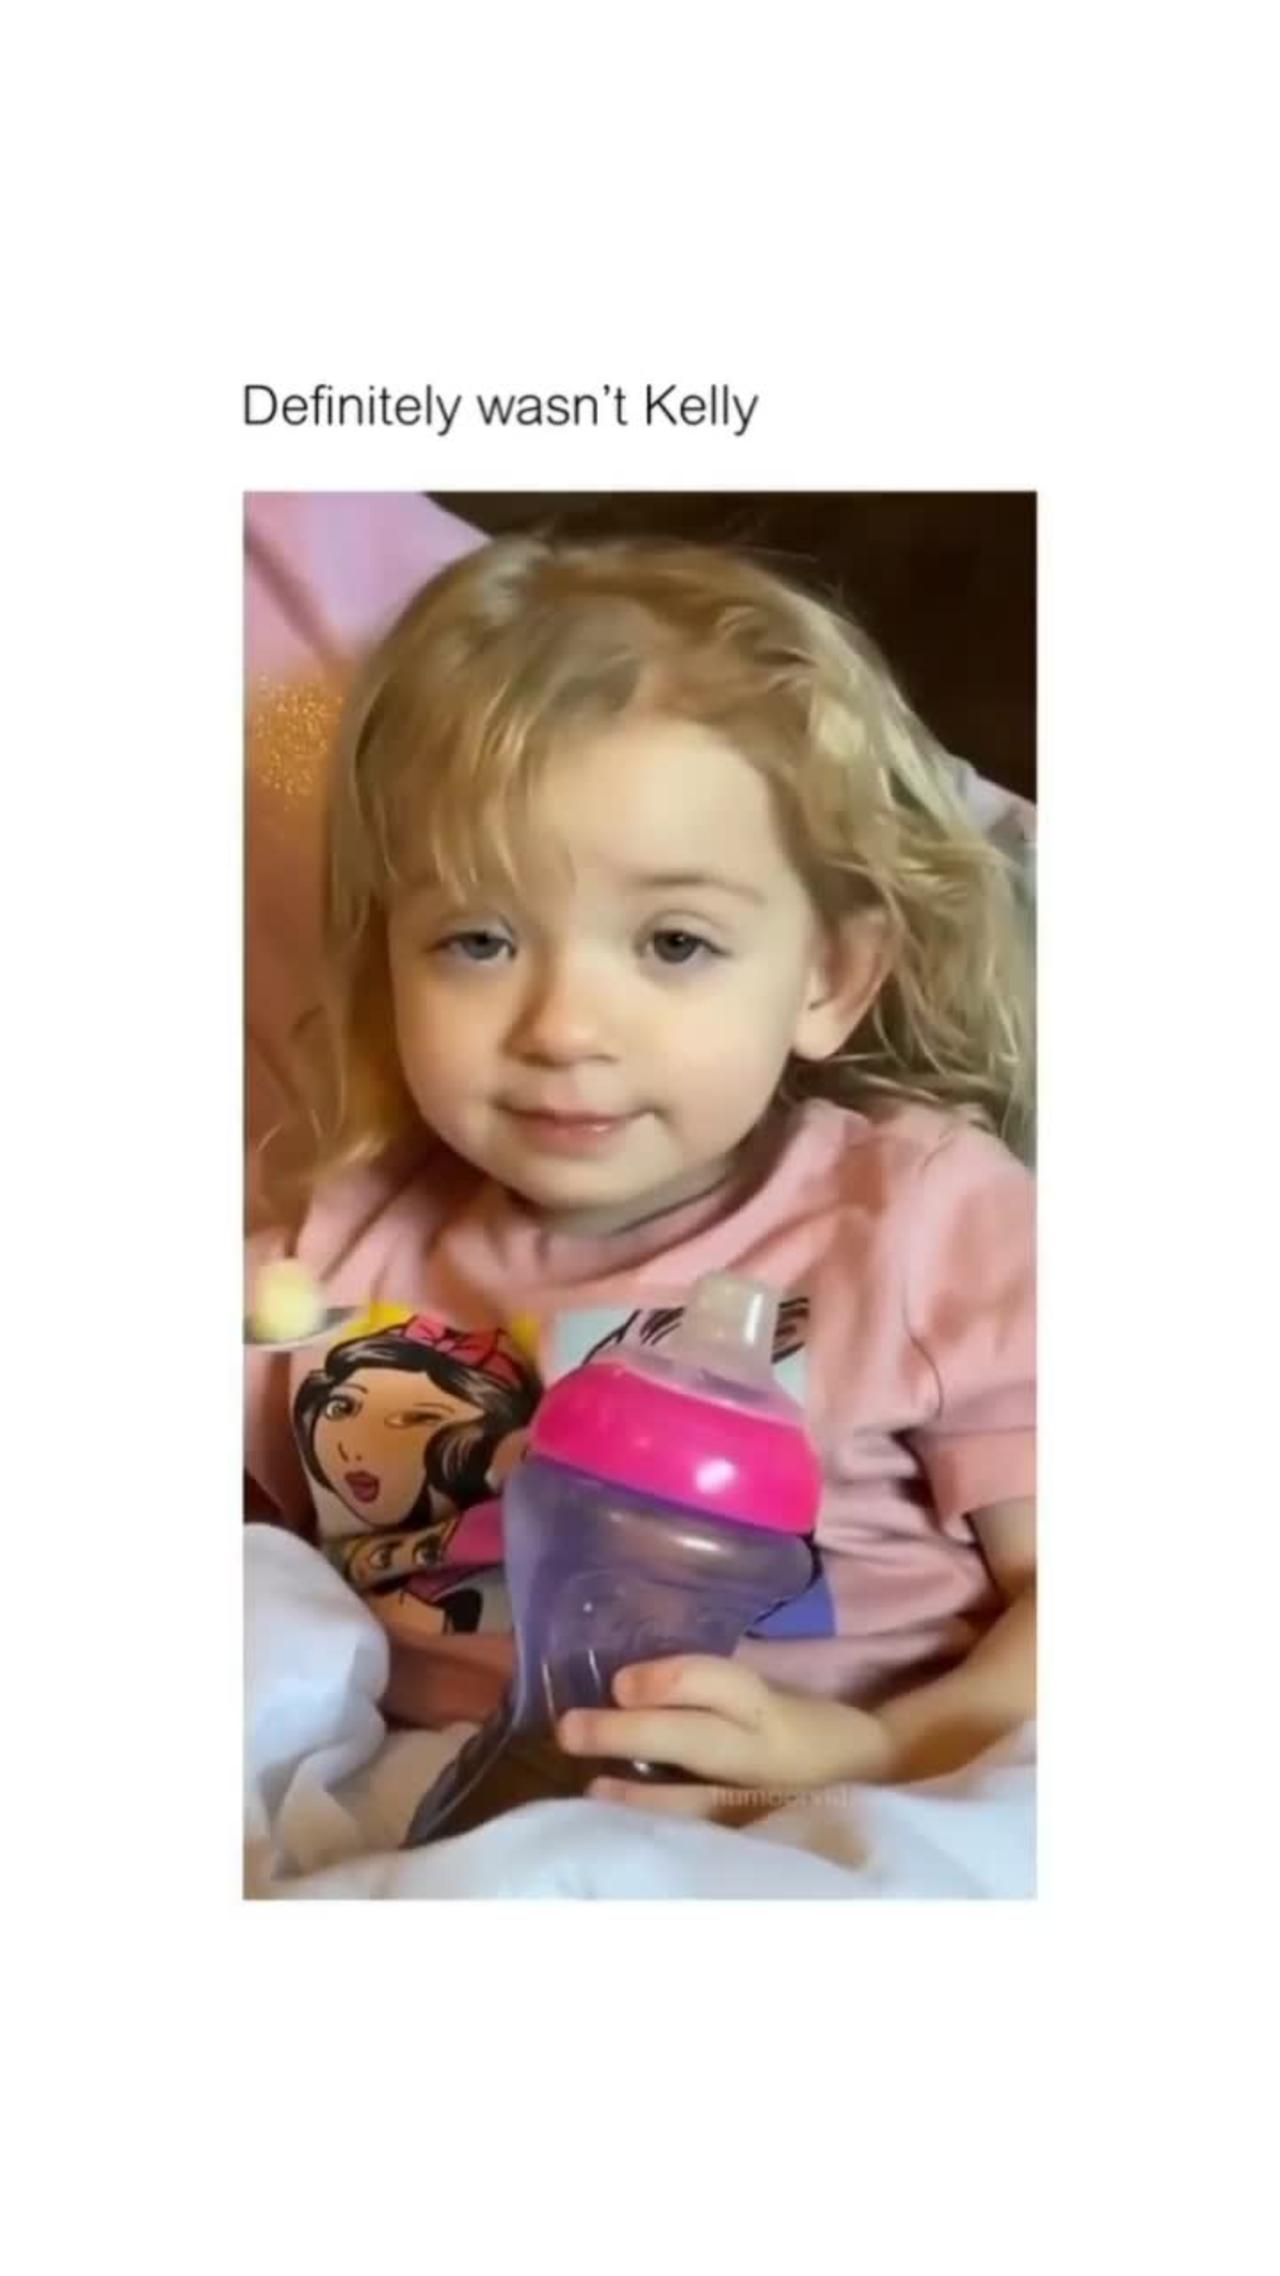 Naughty Toddler draws on her baby brother's face..👶😂😂😈